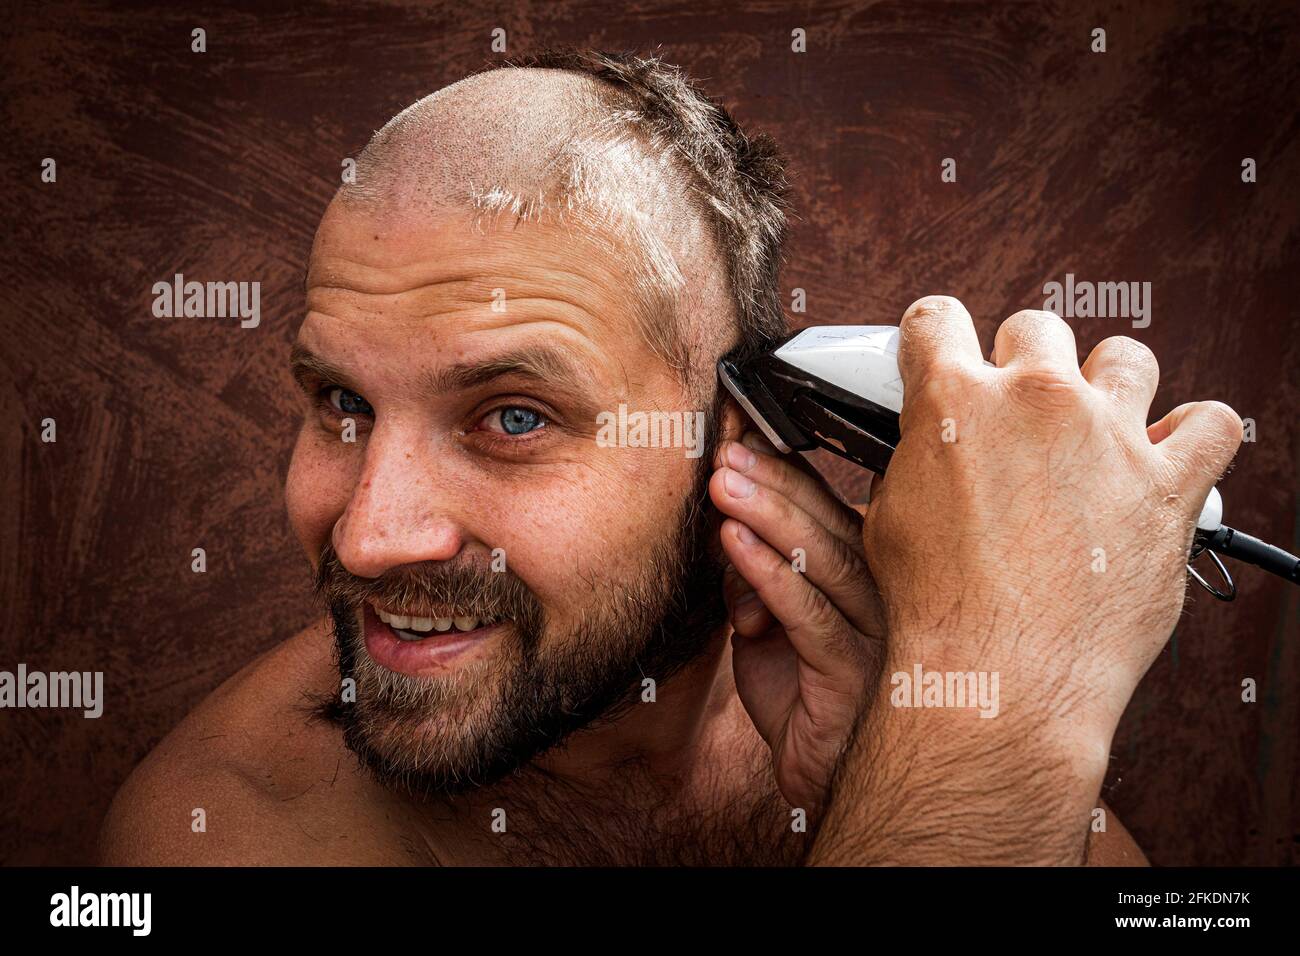 A head should when his man shave Scientifically Proven